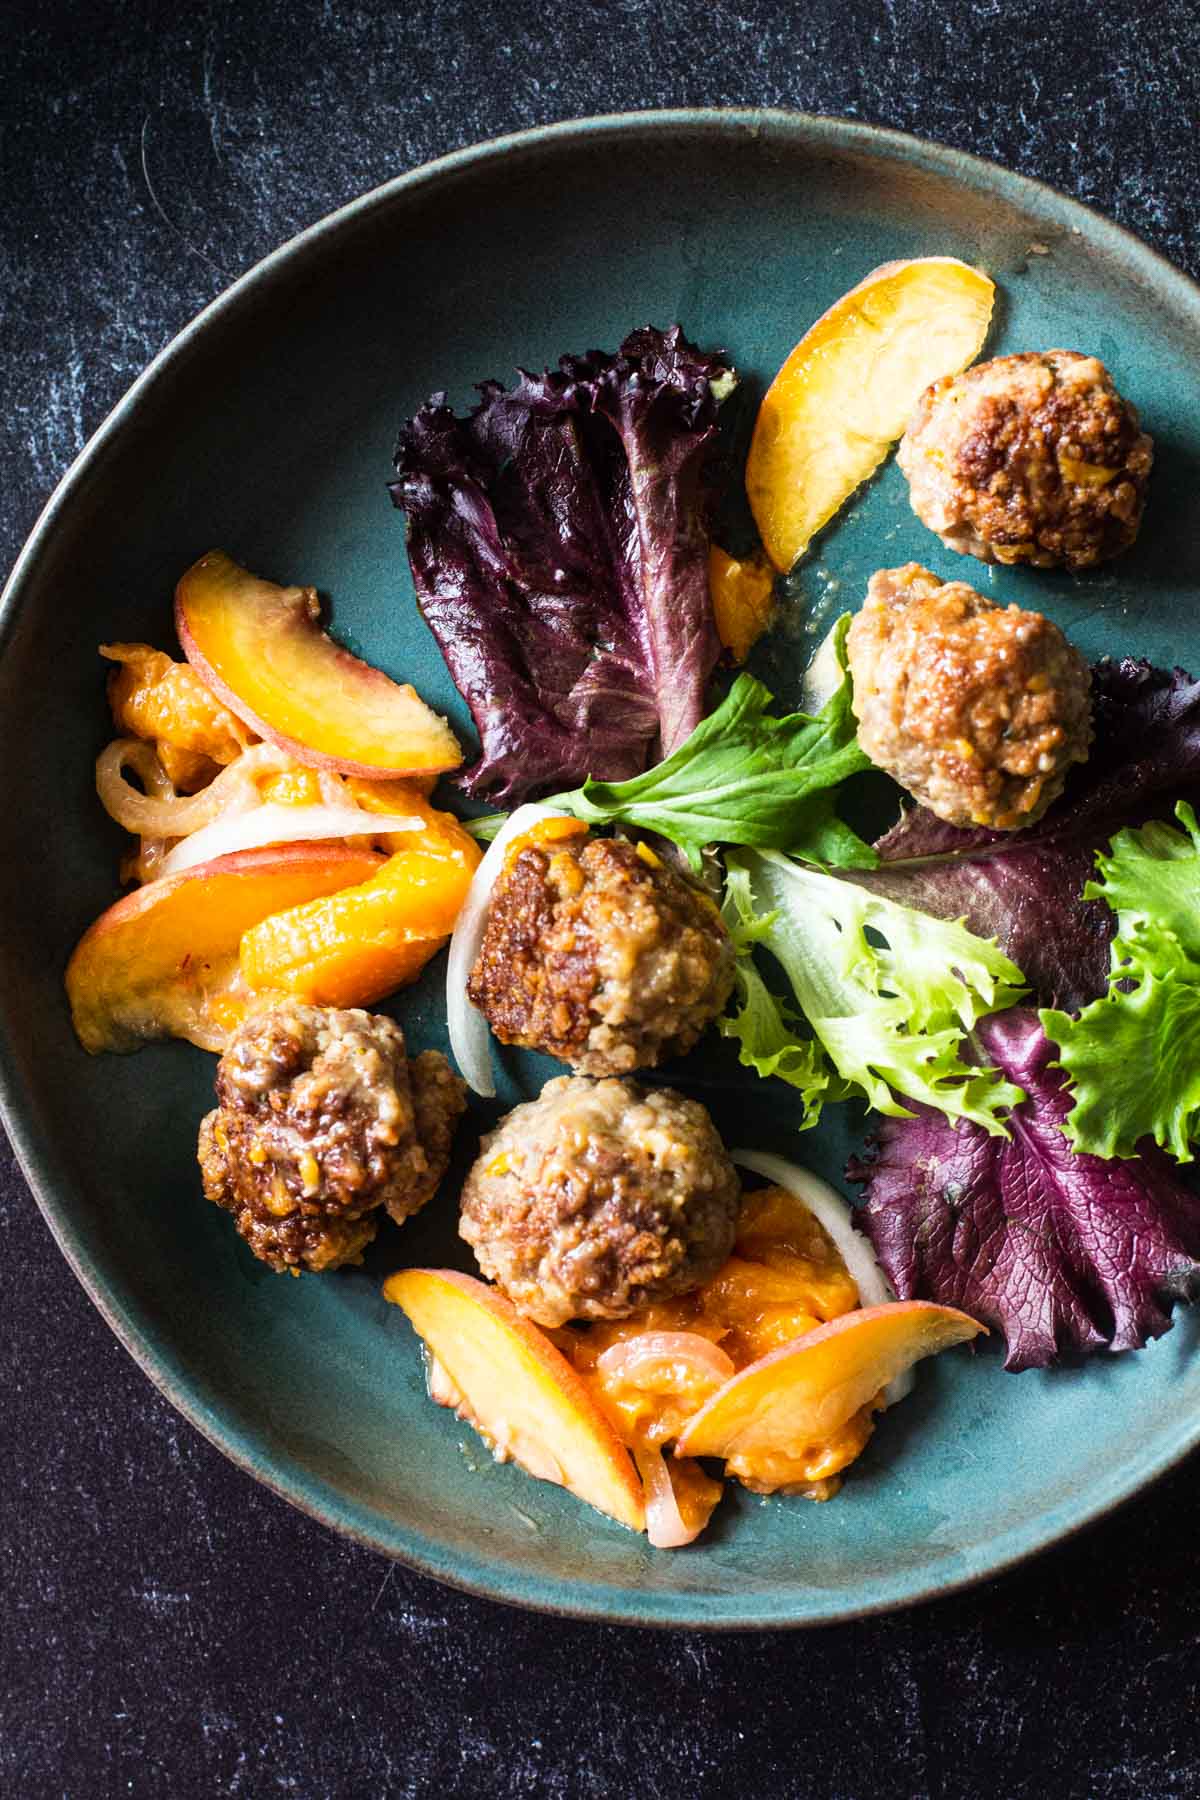 Pan fried meatballs with peaches served with mixed greens.